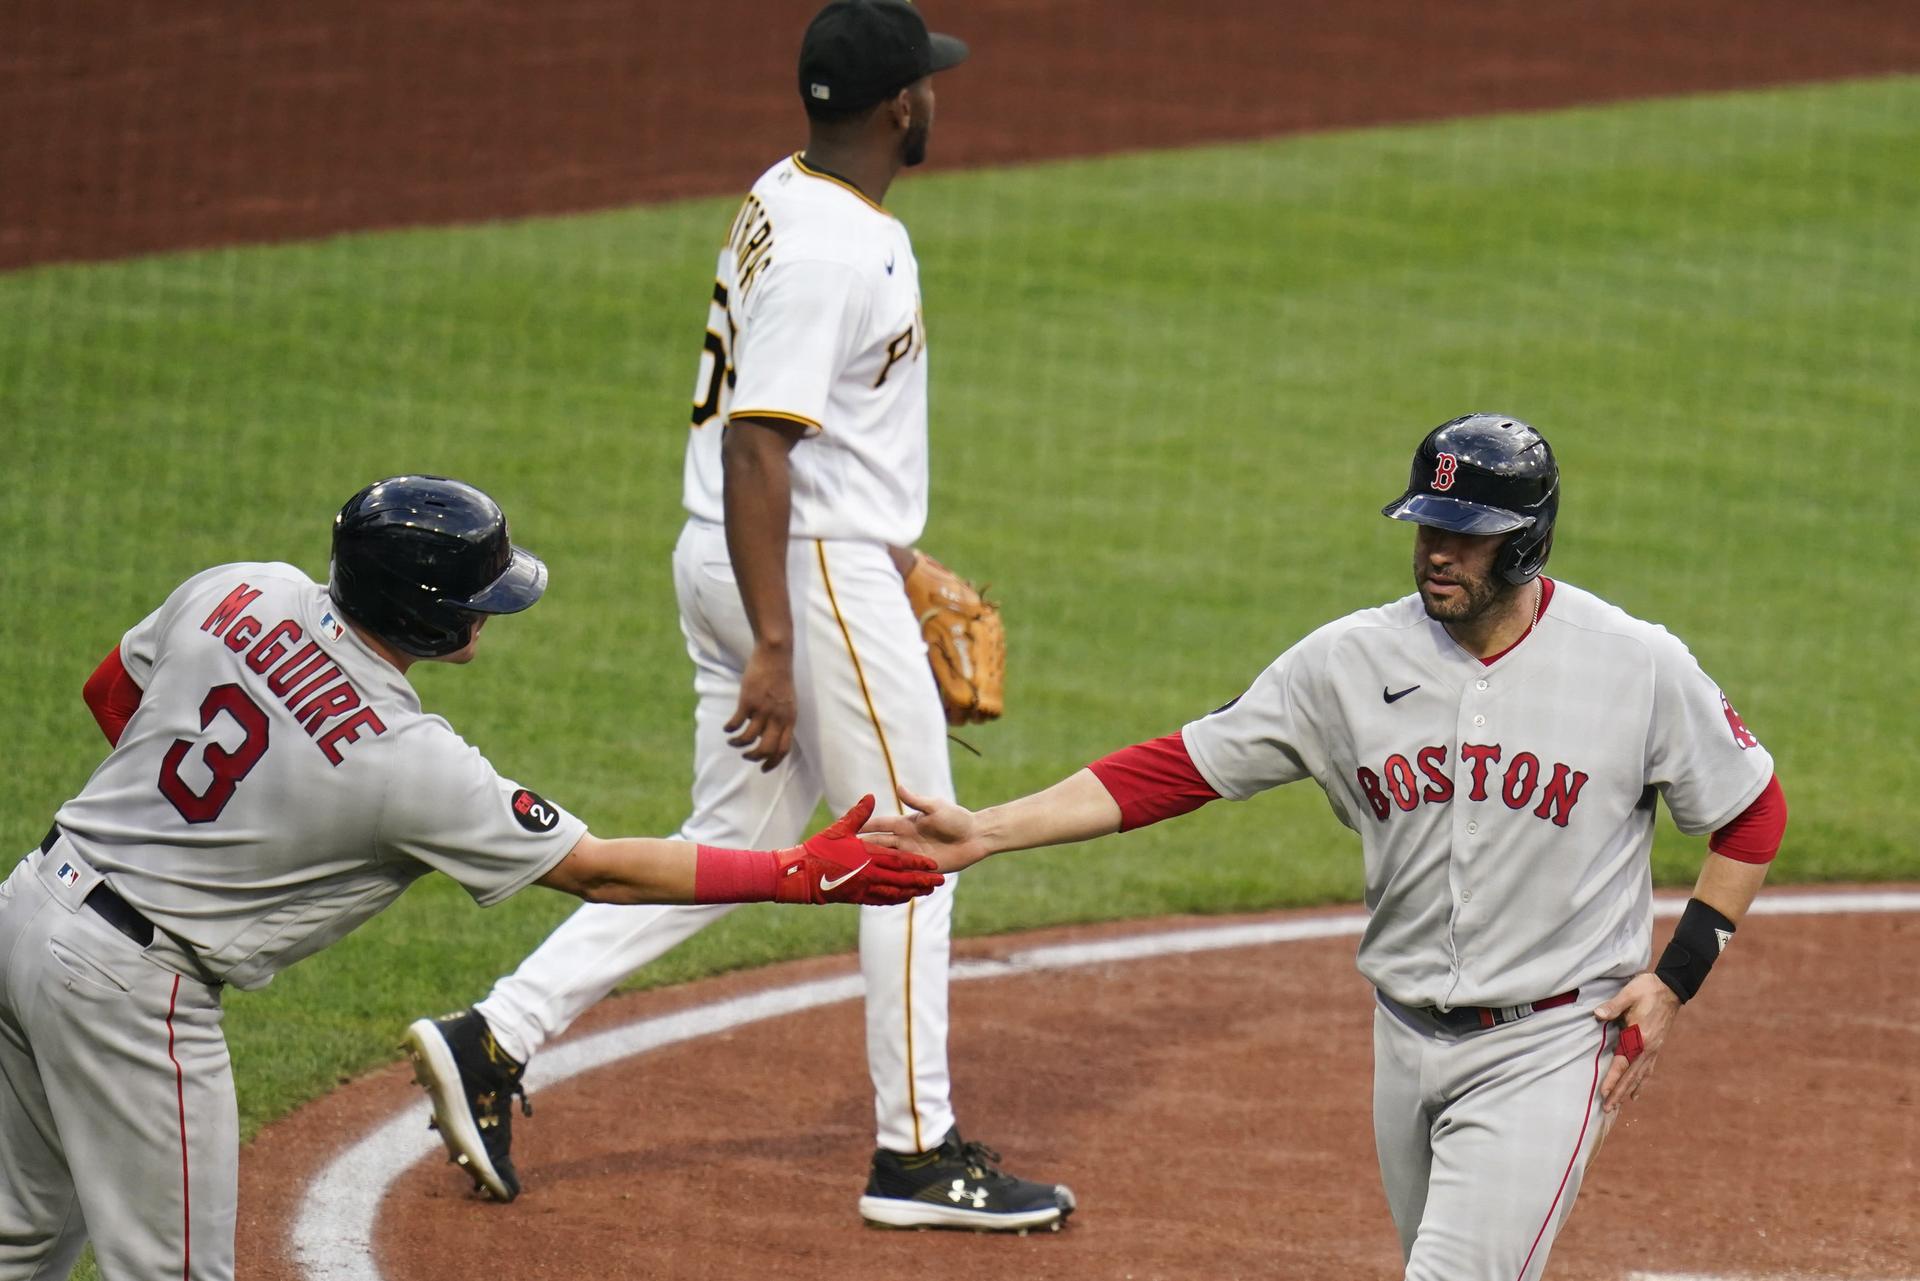 Rangers vs. Red Sox Betting Odds, Picks and Predictions - Friday, September 2, 2022